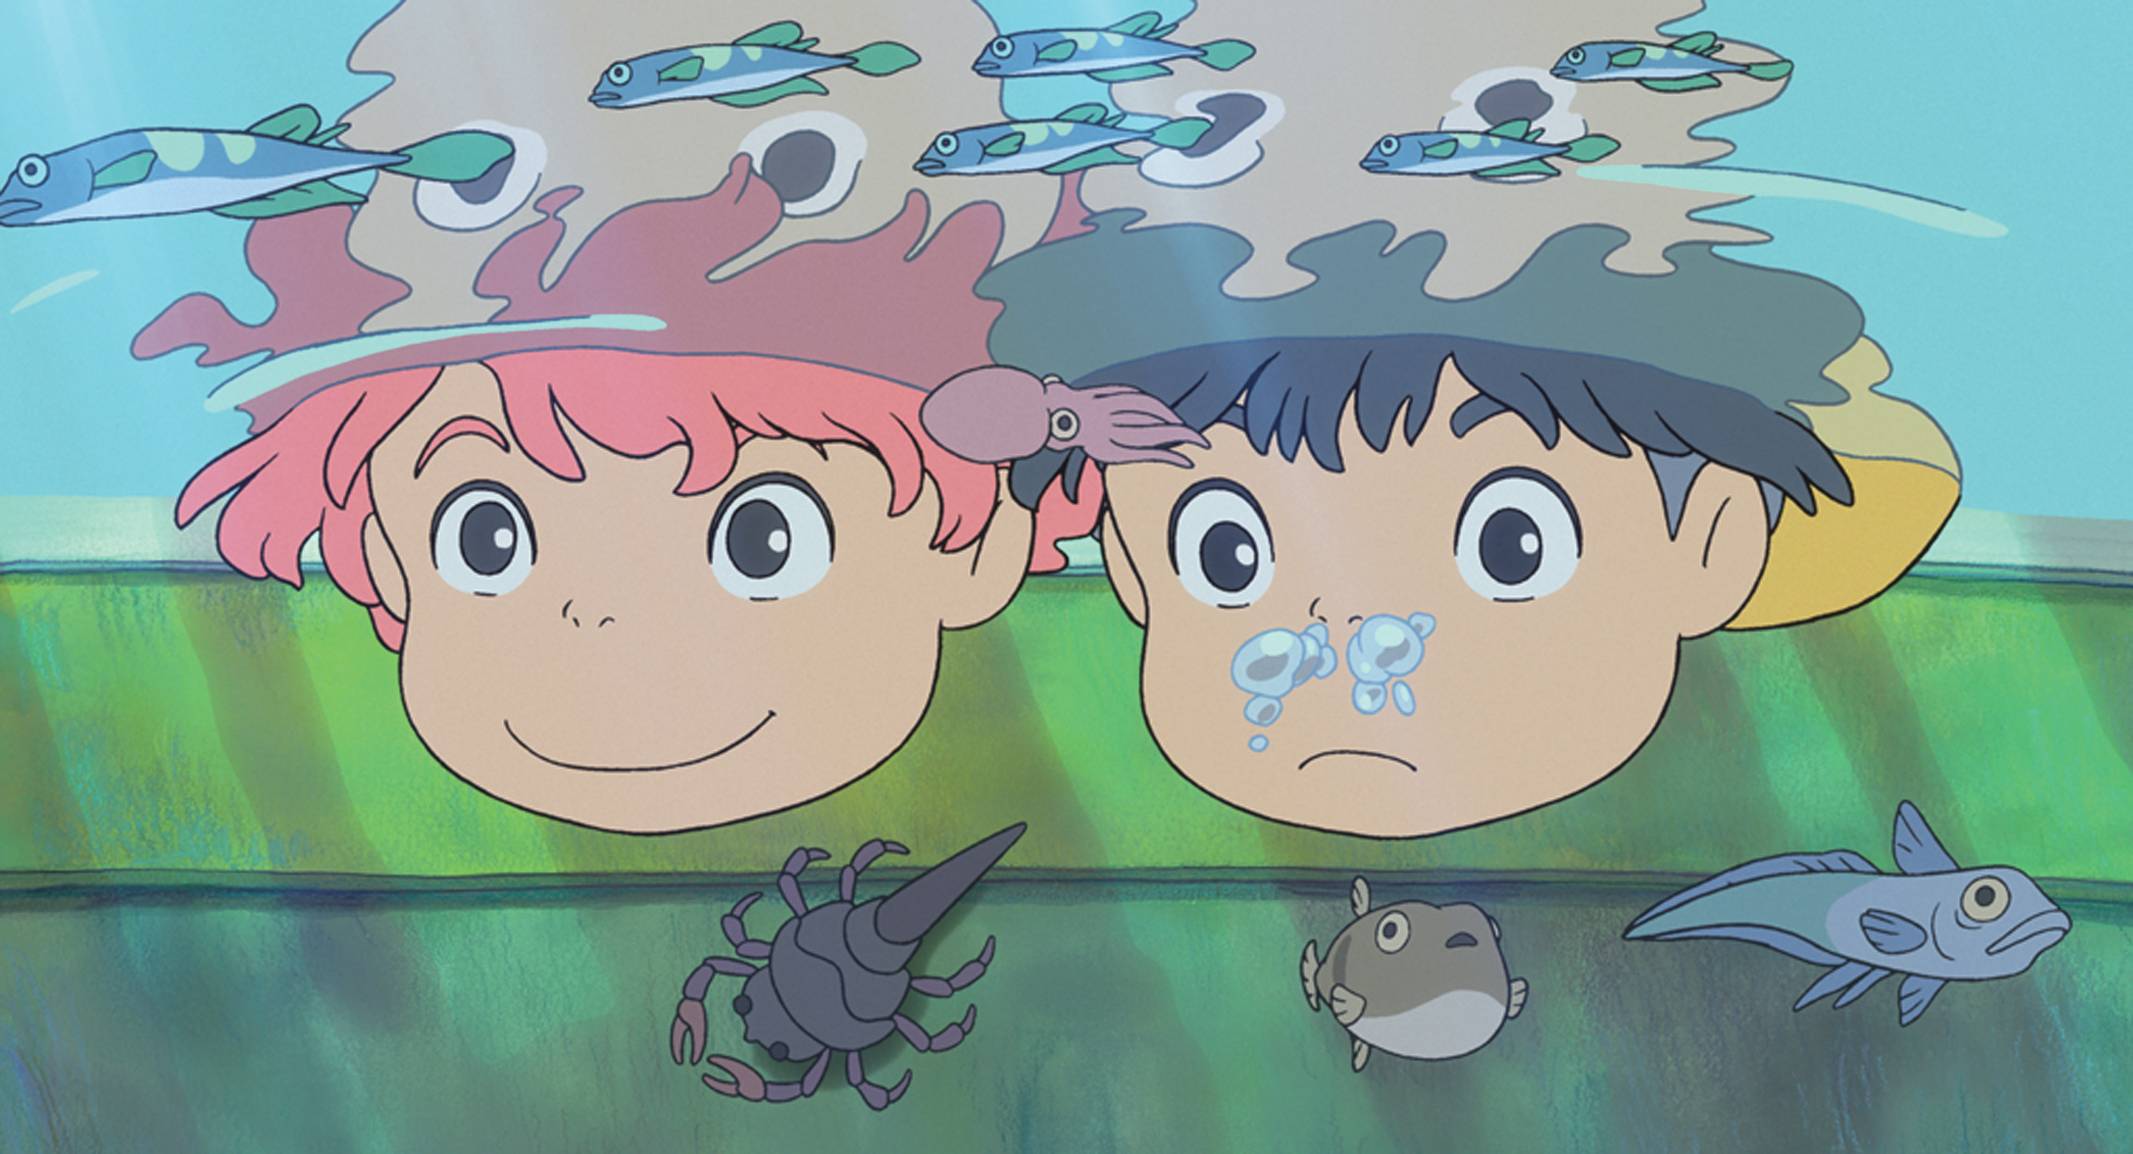 Ponyo and Sosuke dip their faces underwater to look at fish and other tiny marine creatures in a scene from the 2008 theatrical anime film, Ponyo.